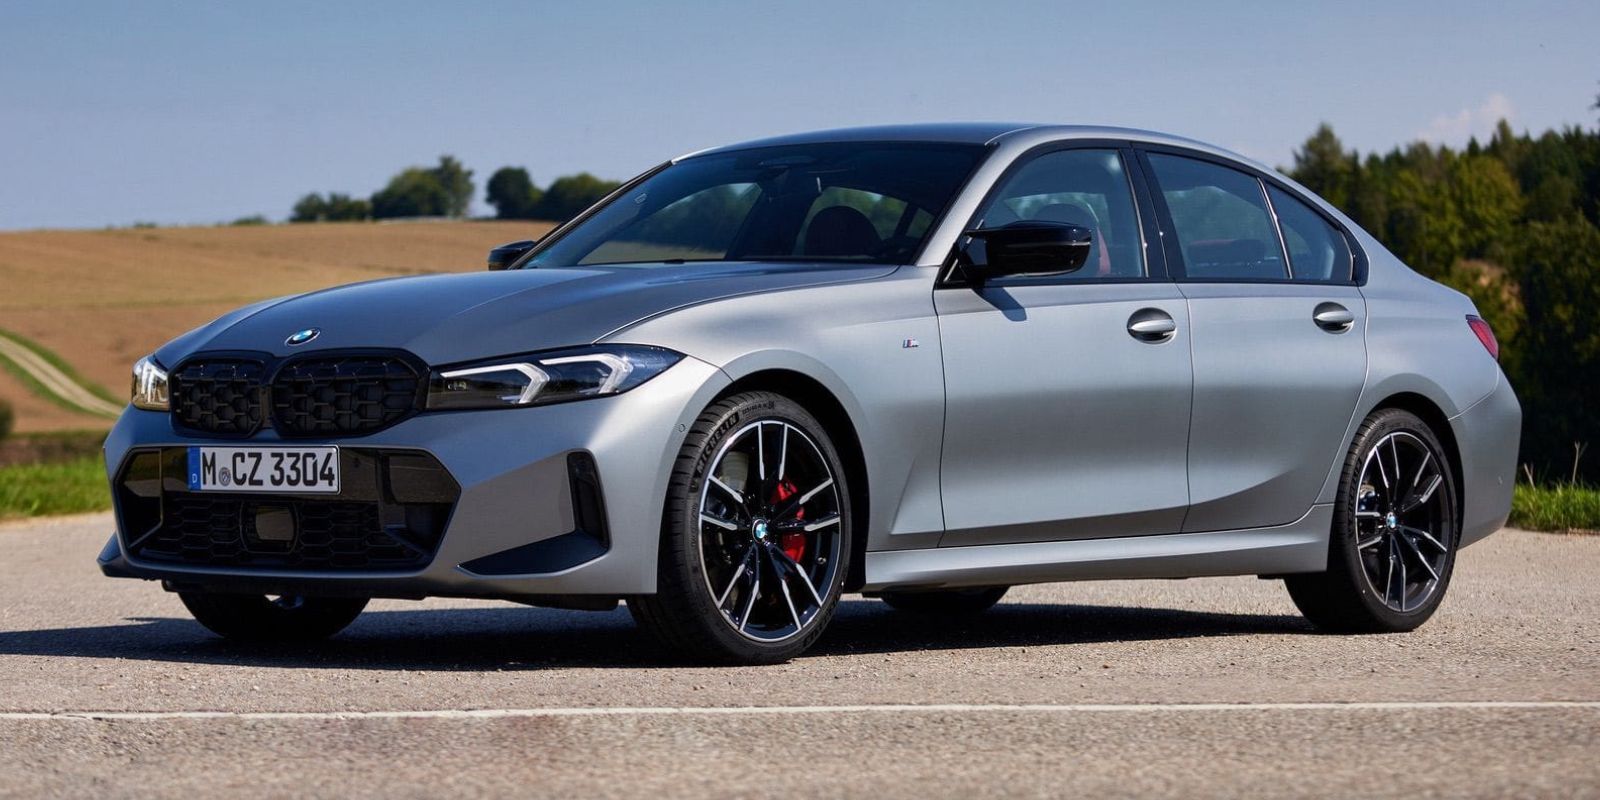 BMW M340i Facelift Launched In India At Rs. 69.20 Lakh